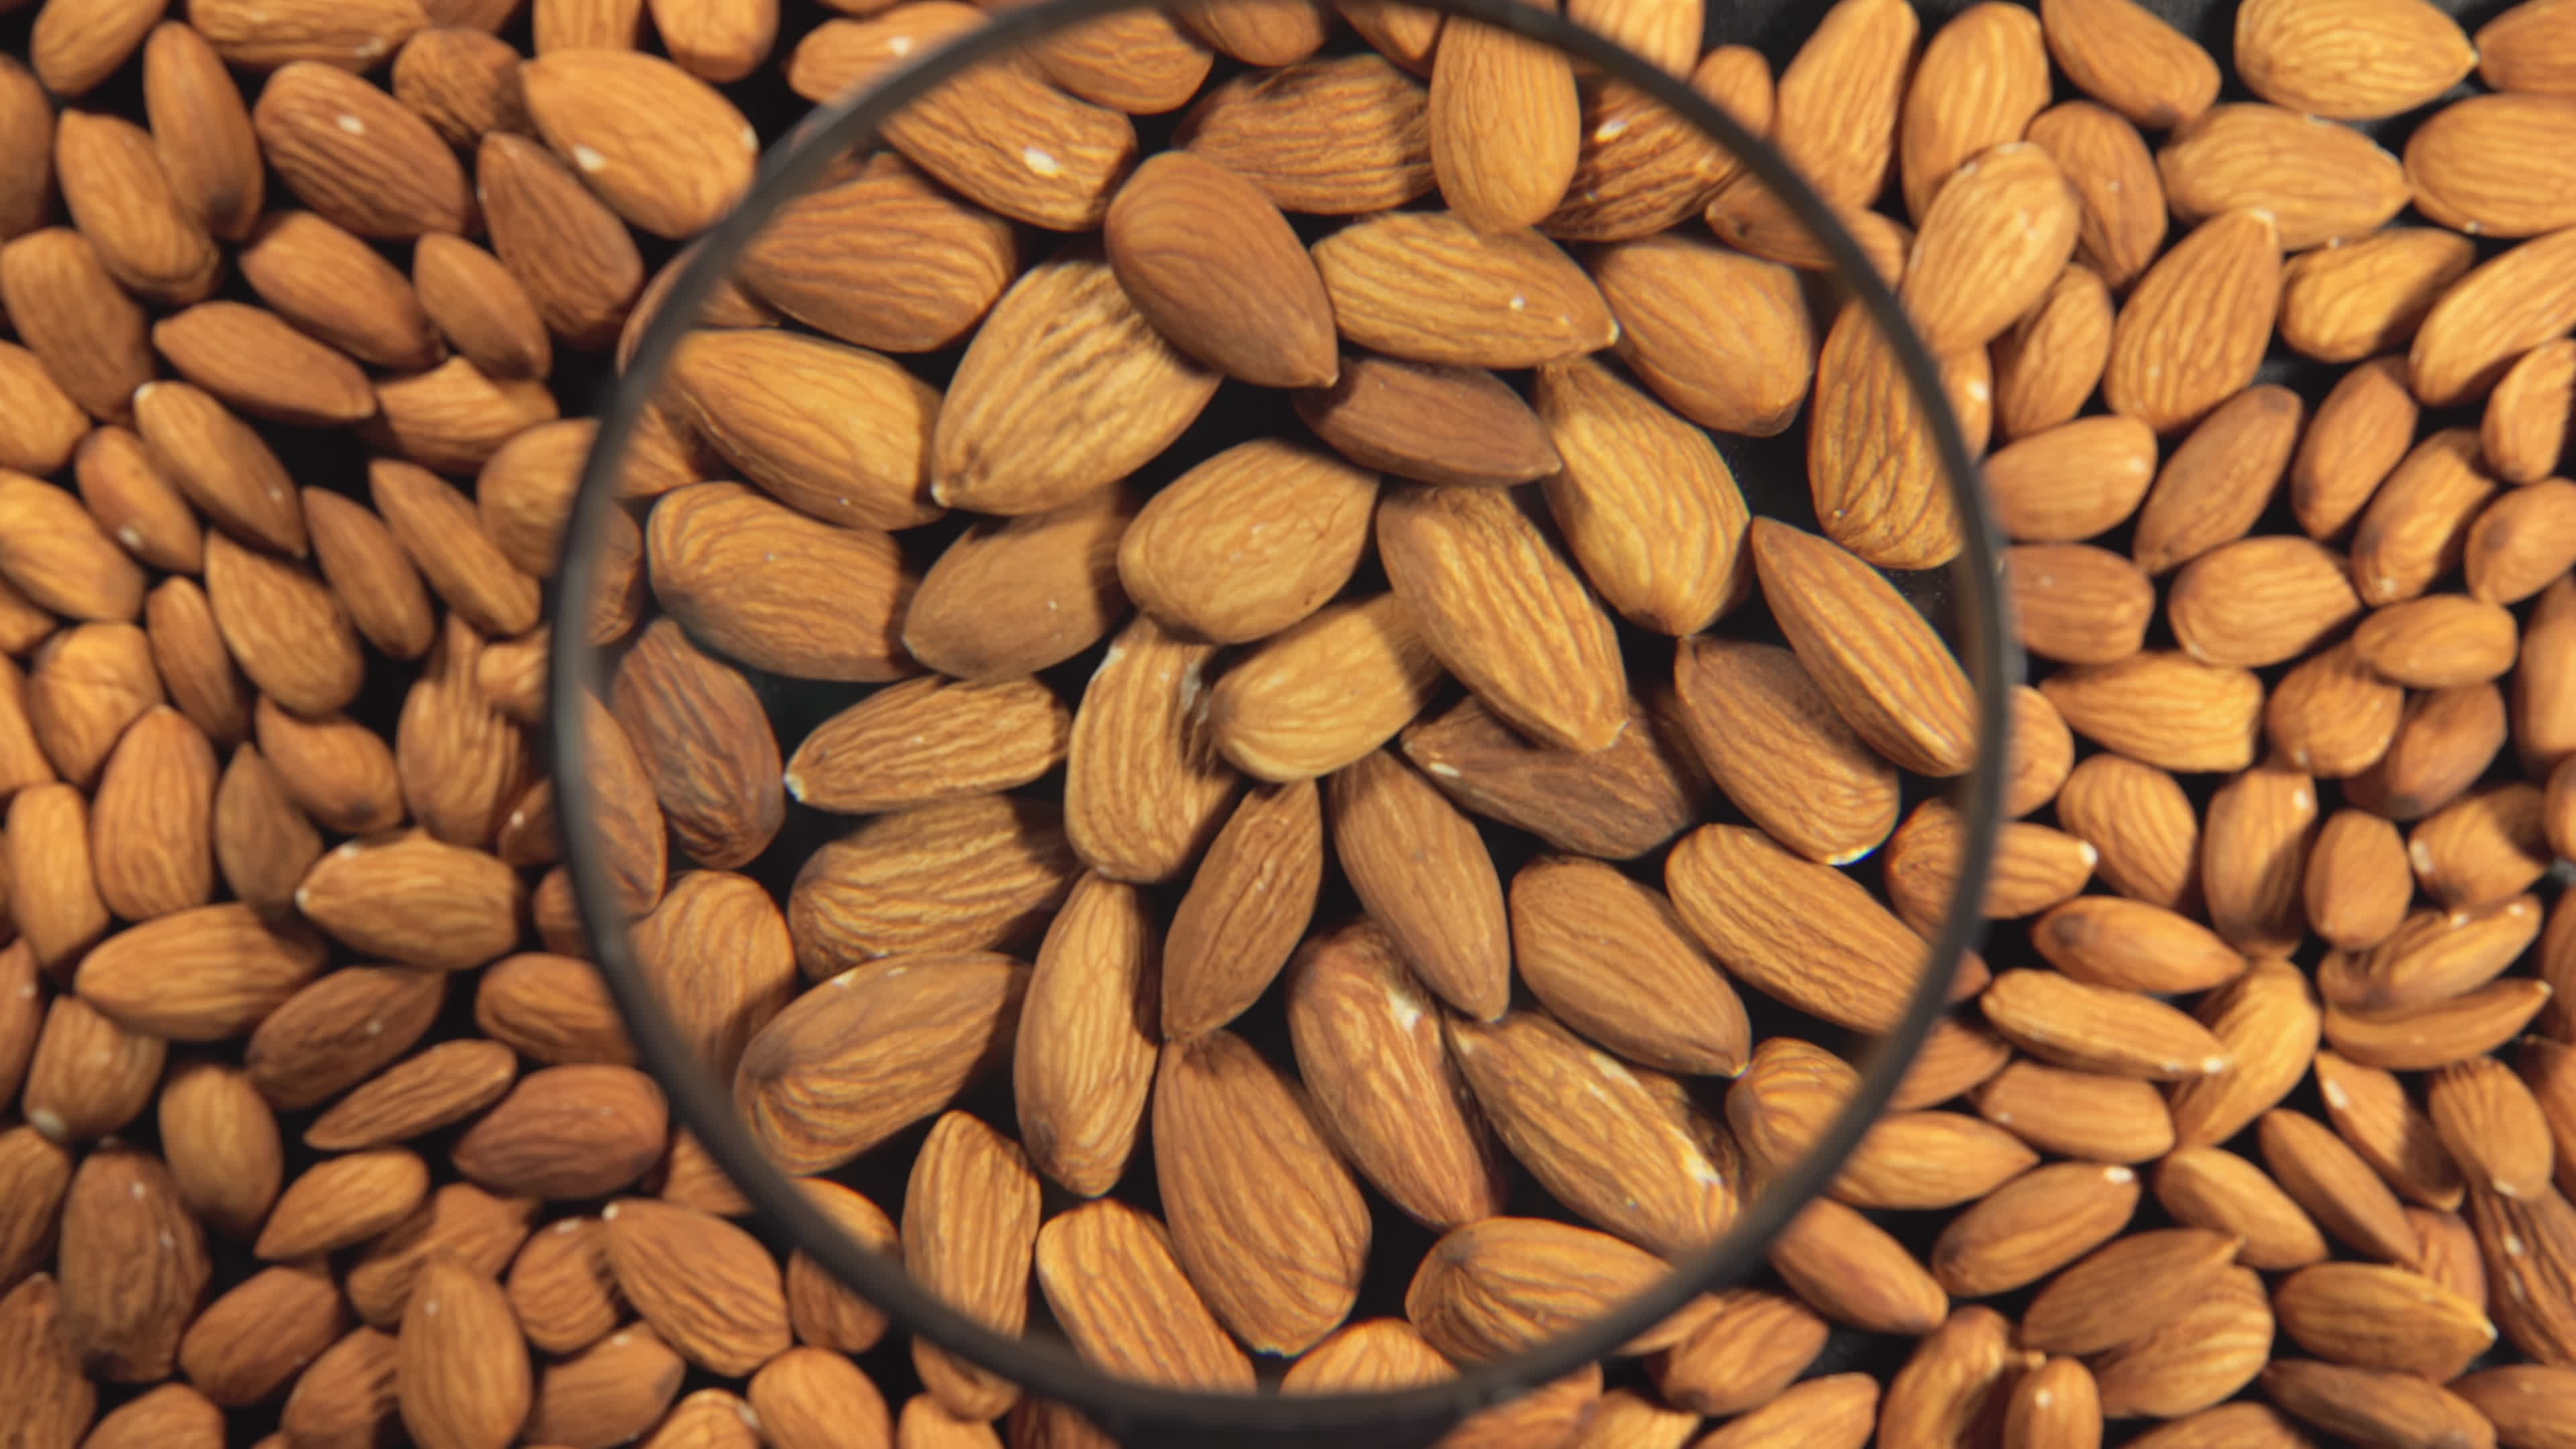 Almonds: One of the lowest calorie nuts, Low in sugars. 3840x2160 4K Wallpaper.